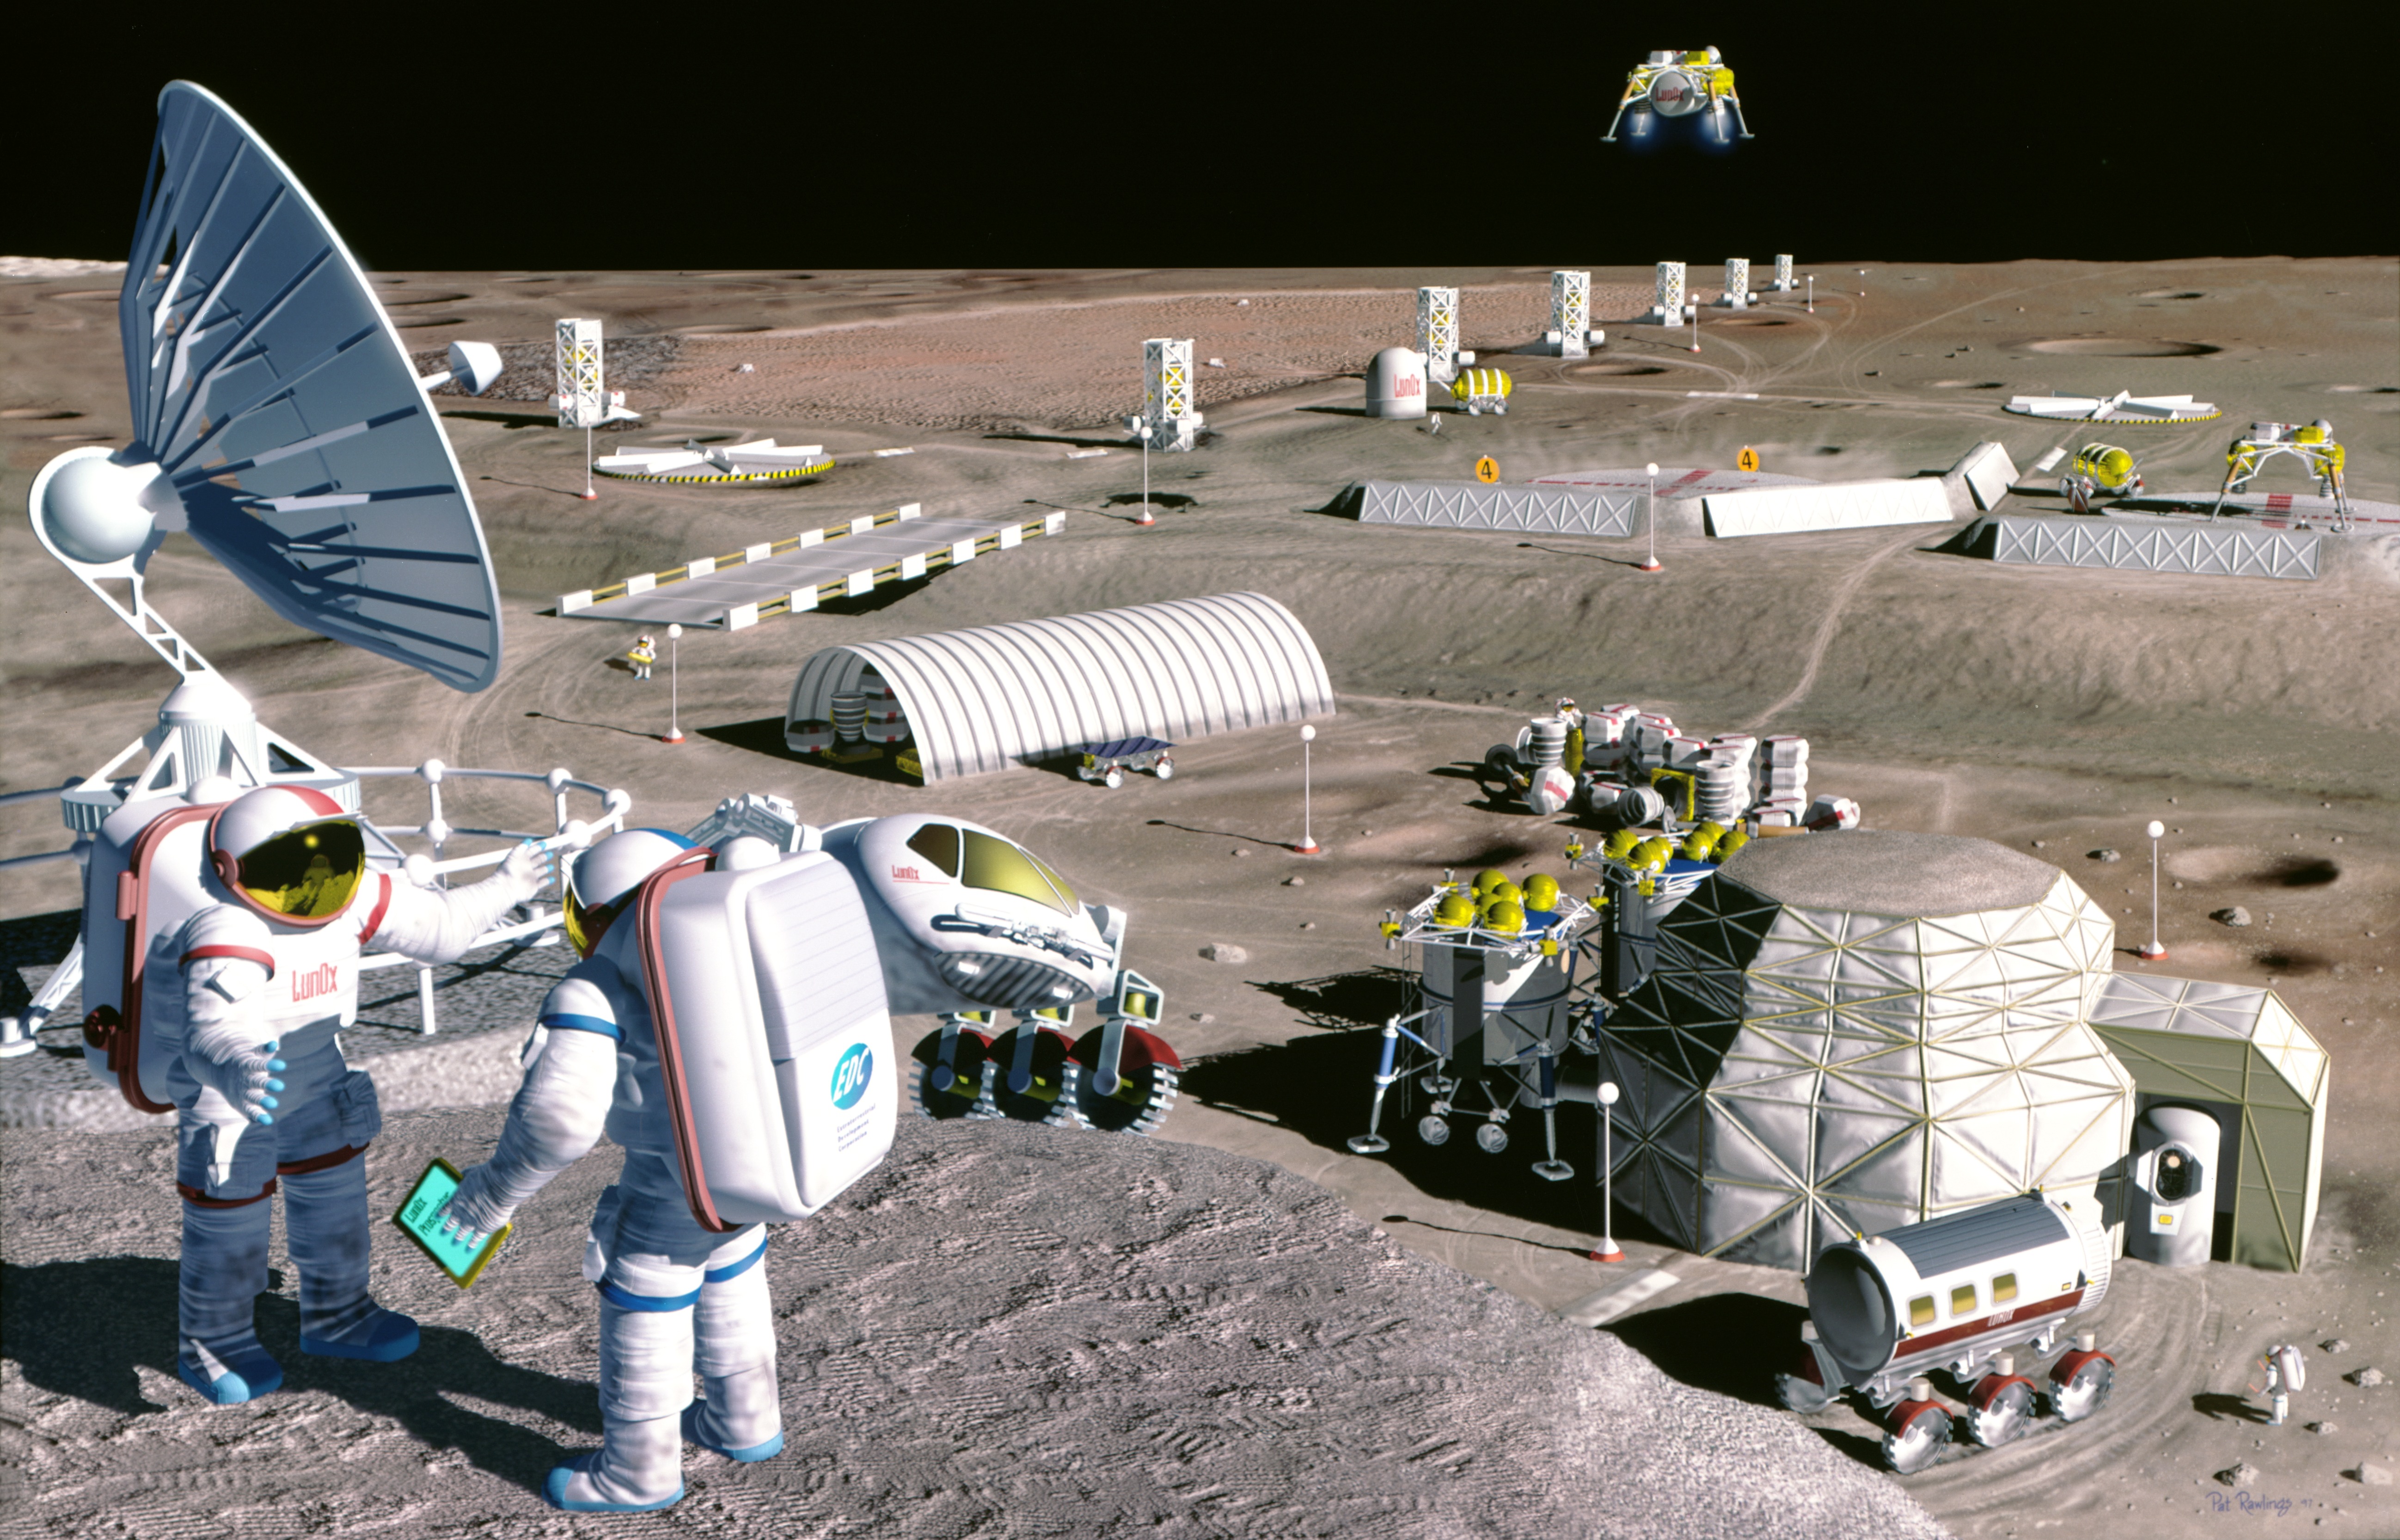 Lunar Mining and the “Industrialization” of Space